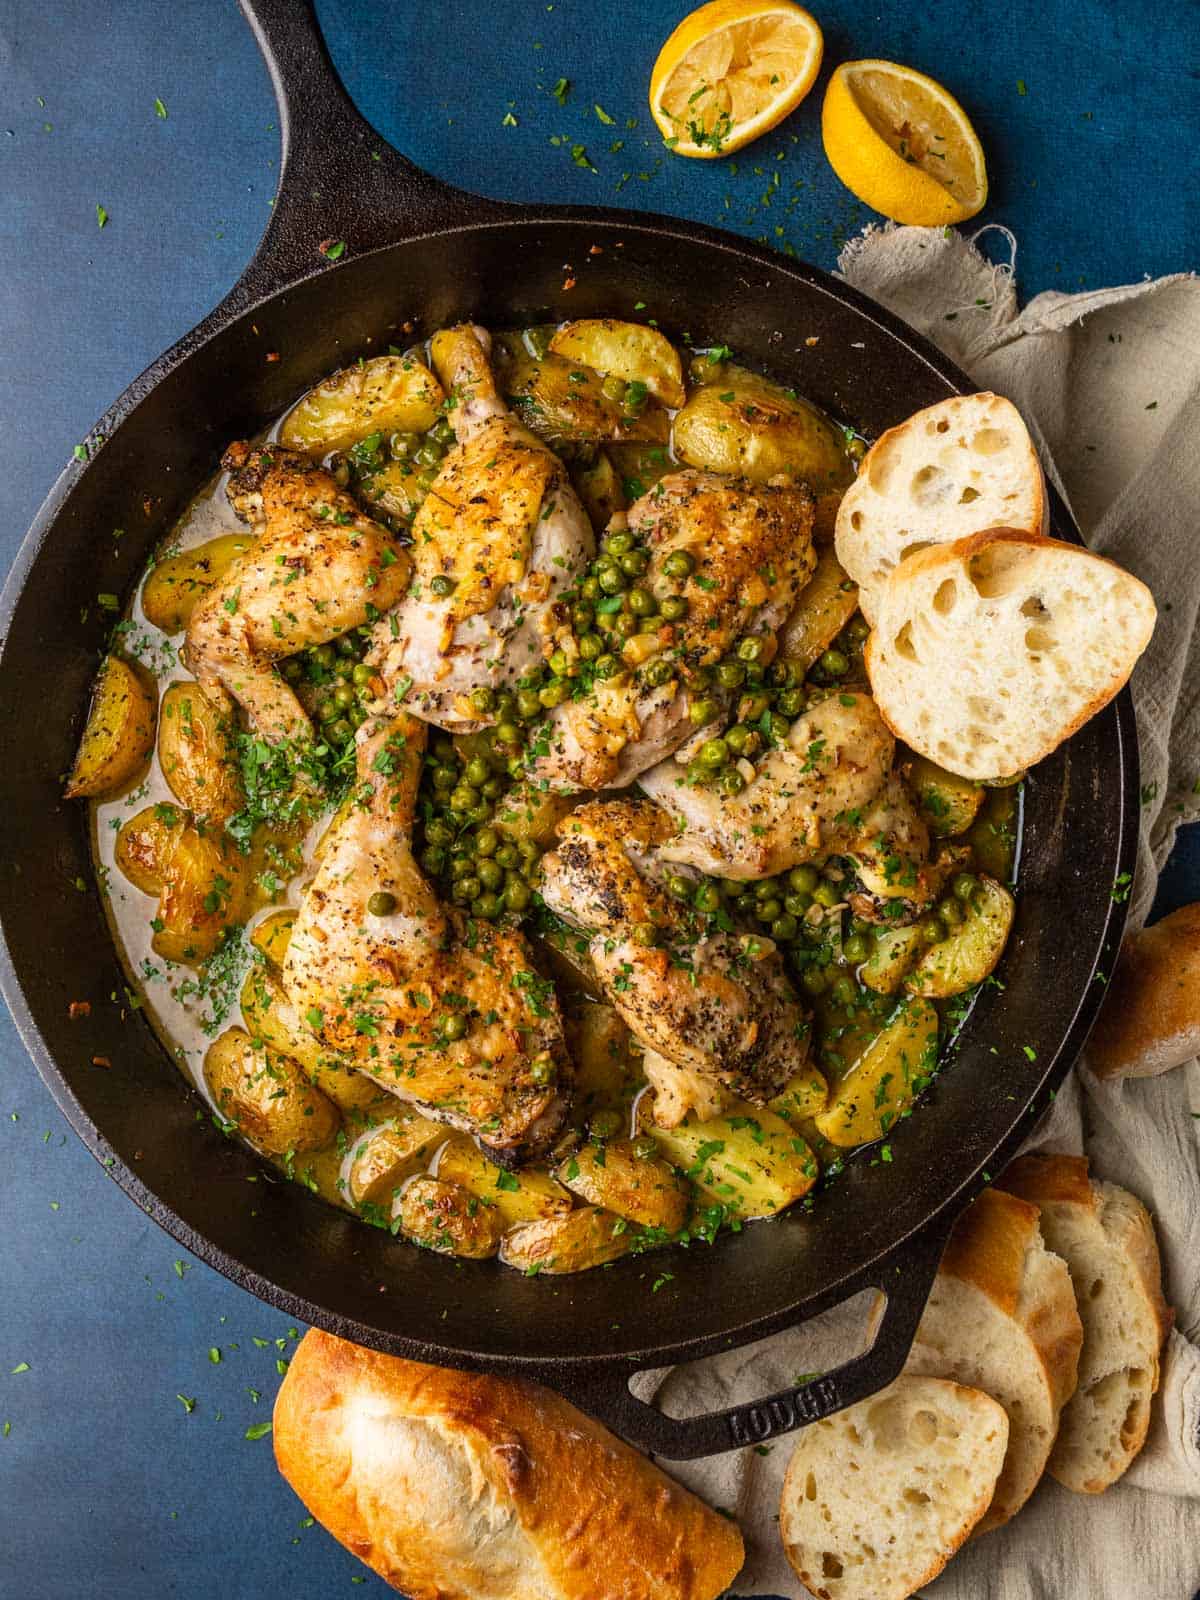 cast iron skillet with roasted chicken potatoes and peas in a sauce with a few slices of bread.